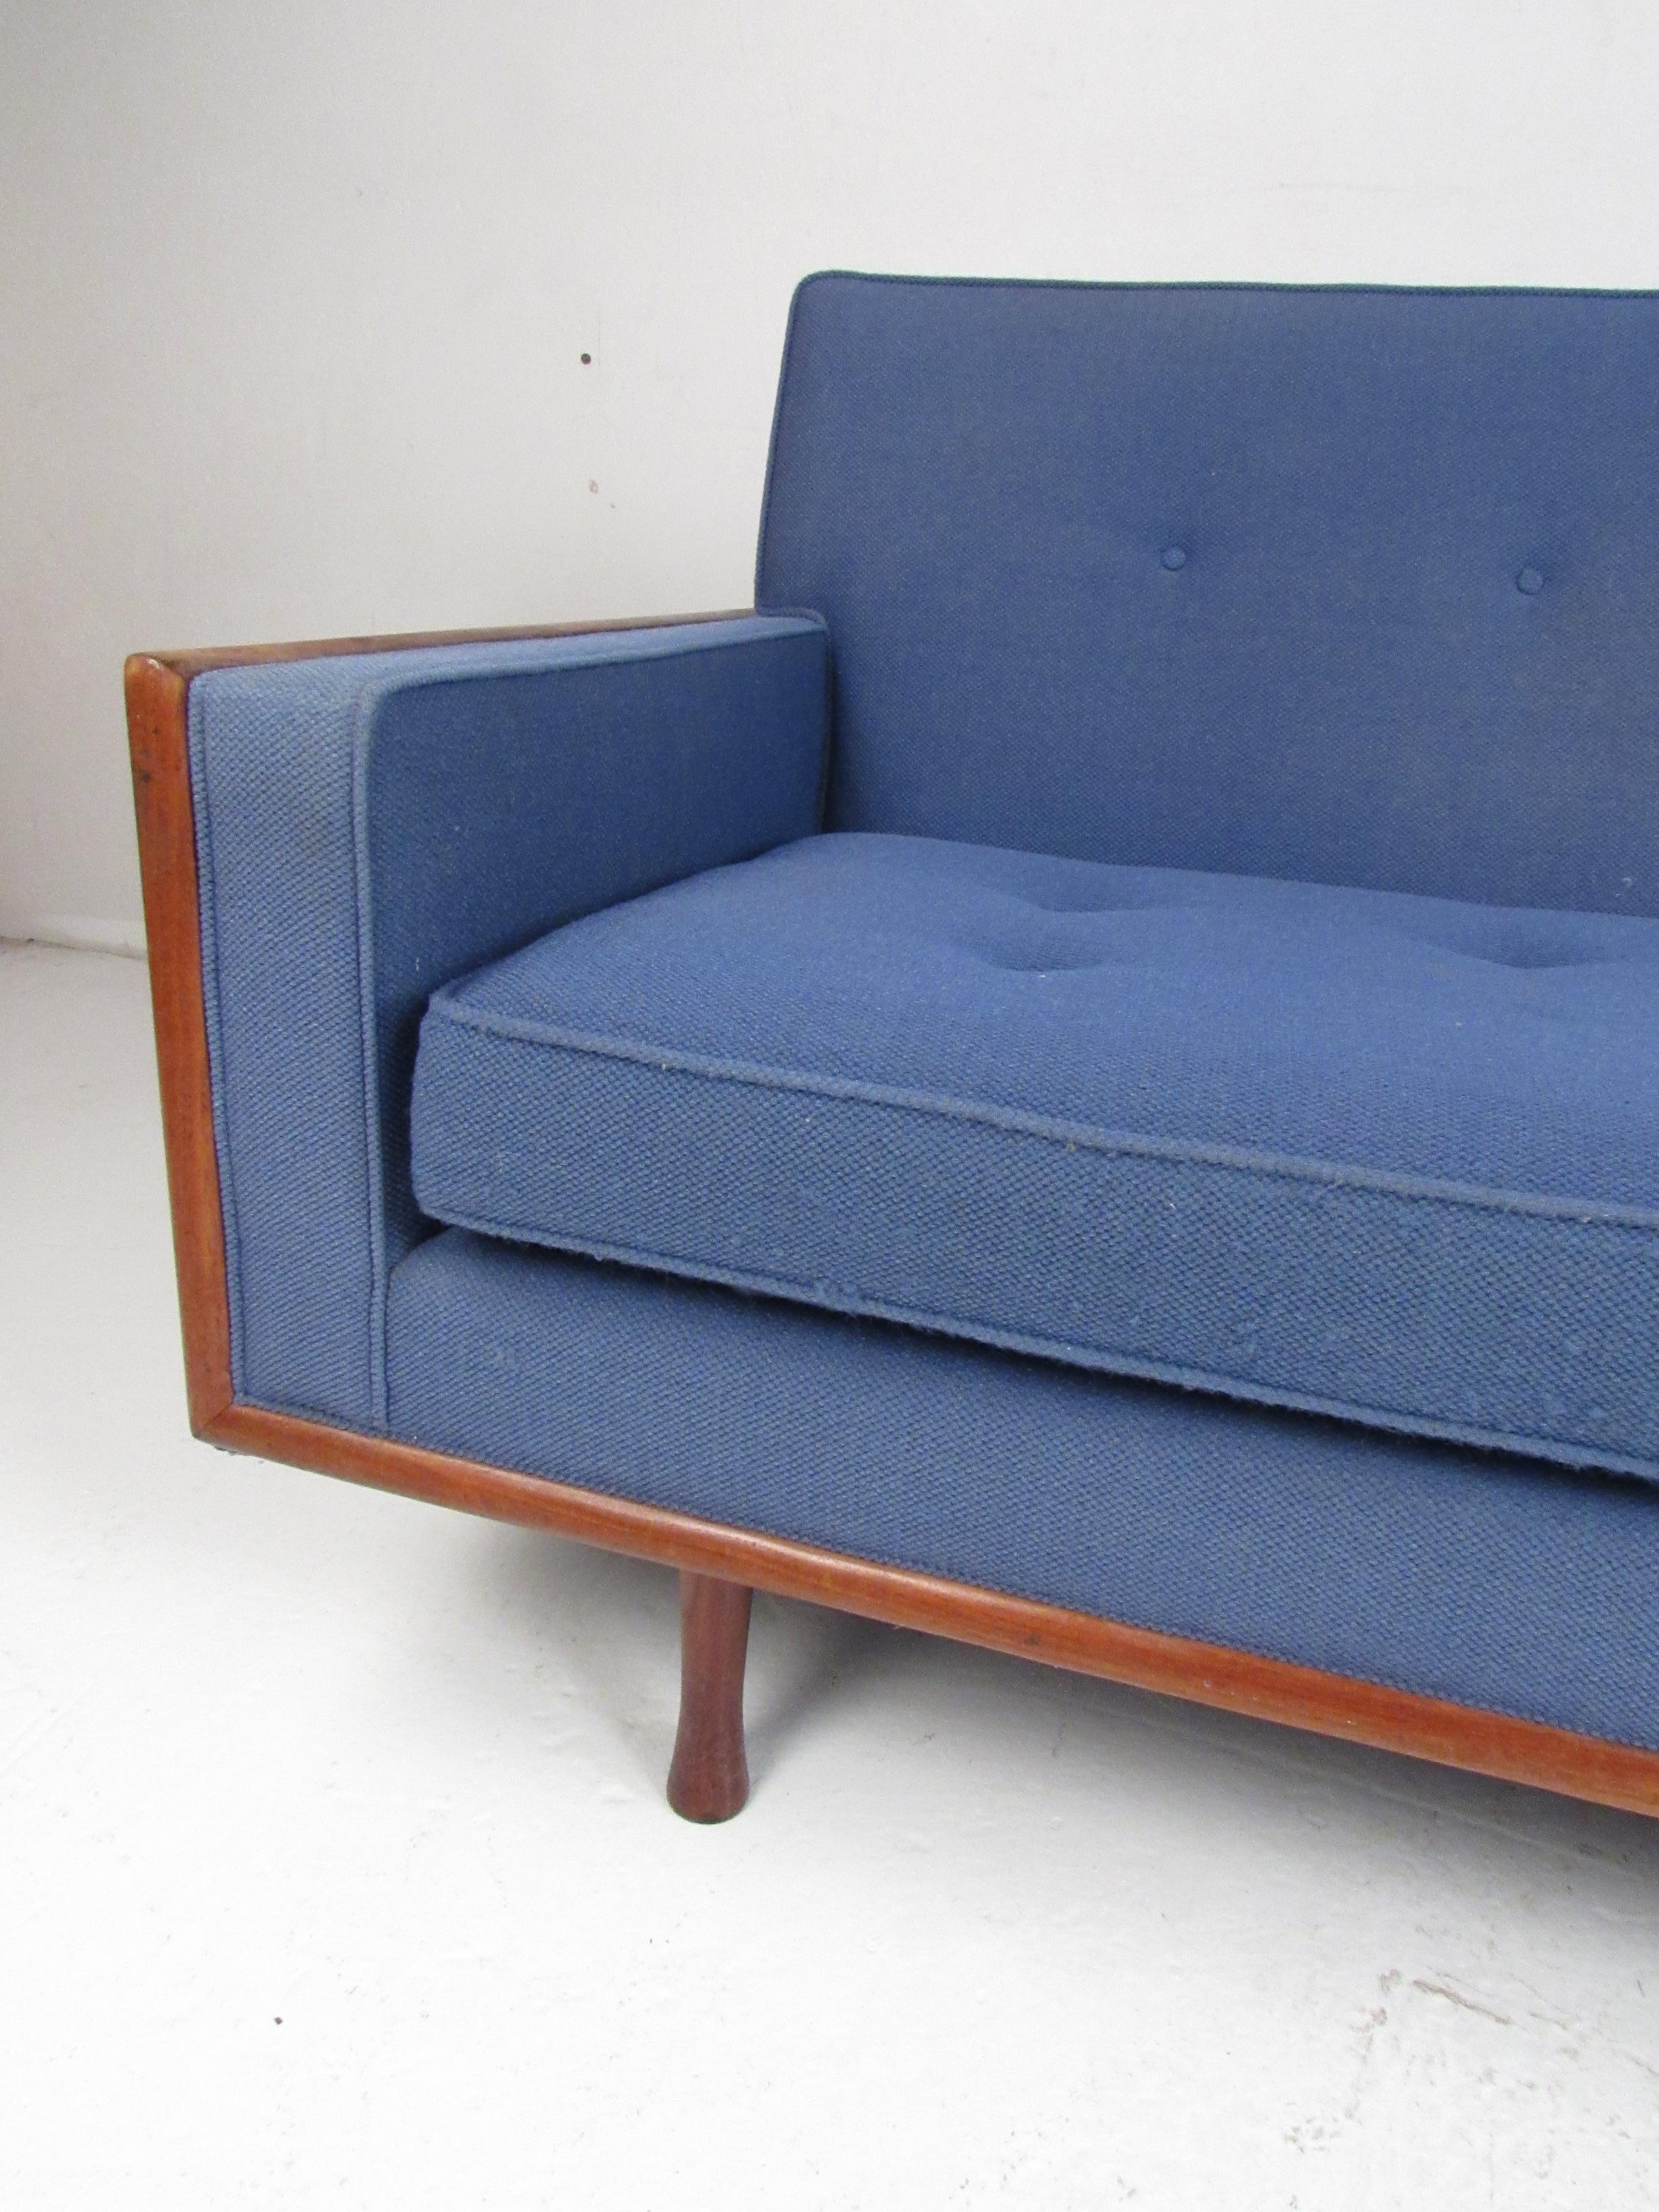 Late 20th Century Mid-Century Modern Sofa with Walnut Accents